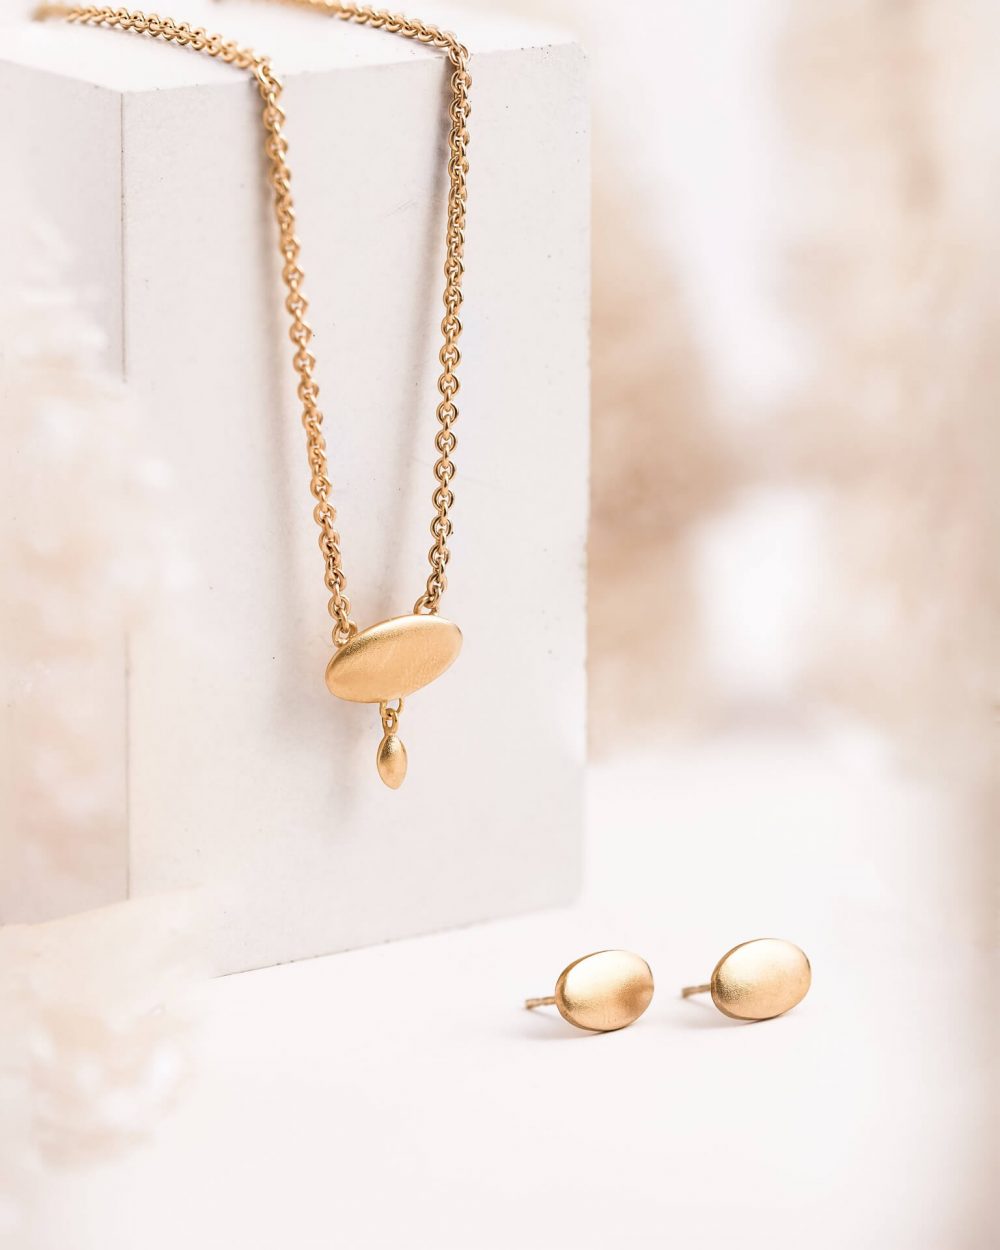 Ellipse Oval Necklace And Earrings Gold Jewellery Gift Set